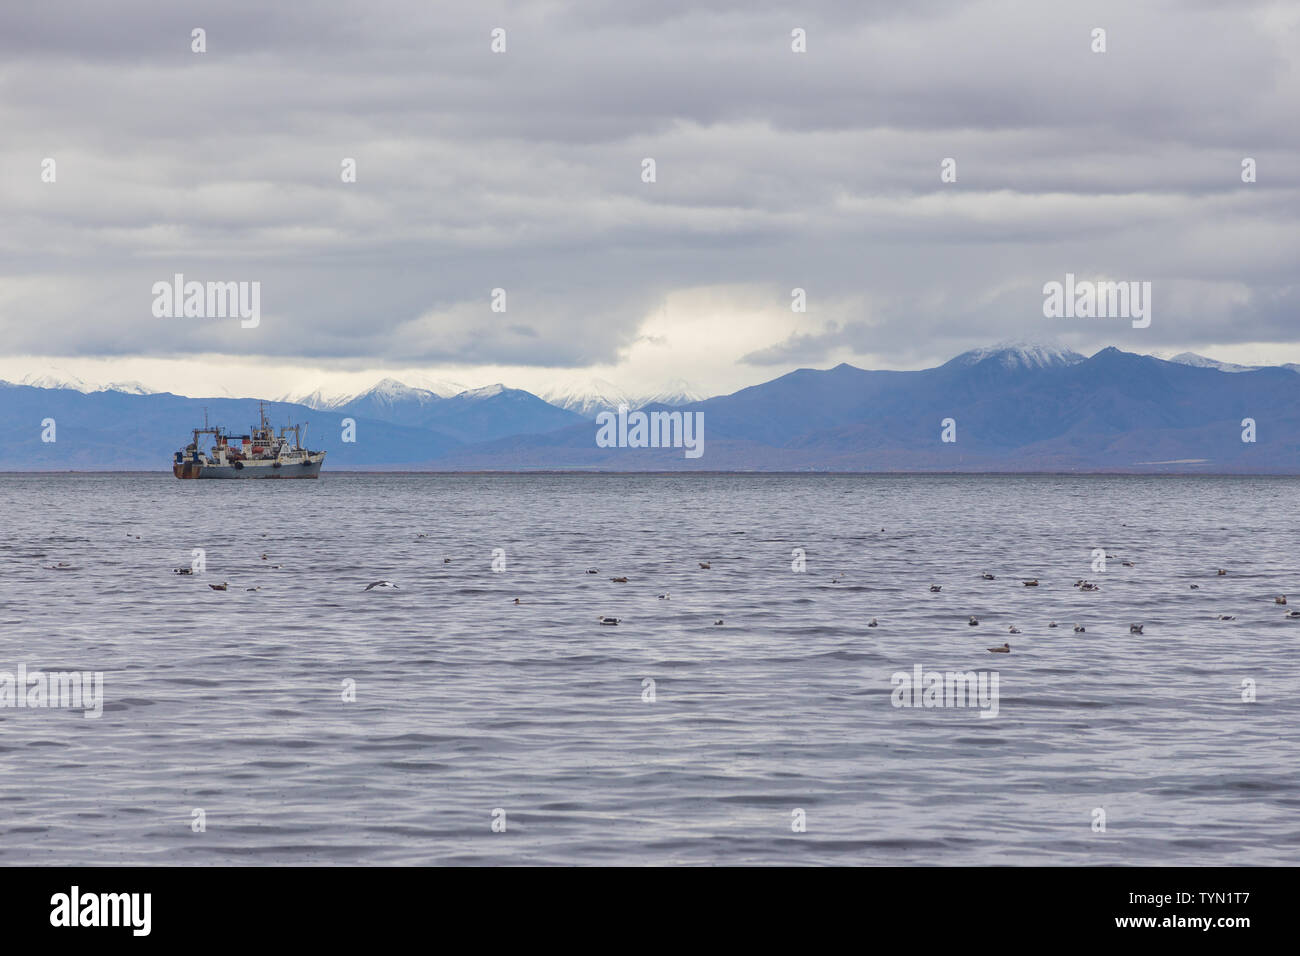 View of the Avacha Bay. Ships standing in the roadstead, mountain in the background. Petropavlovsk-Kamchatsky, Kamchatka Peninsula, Russia. Stock Photo